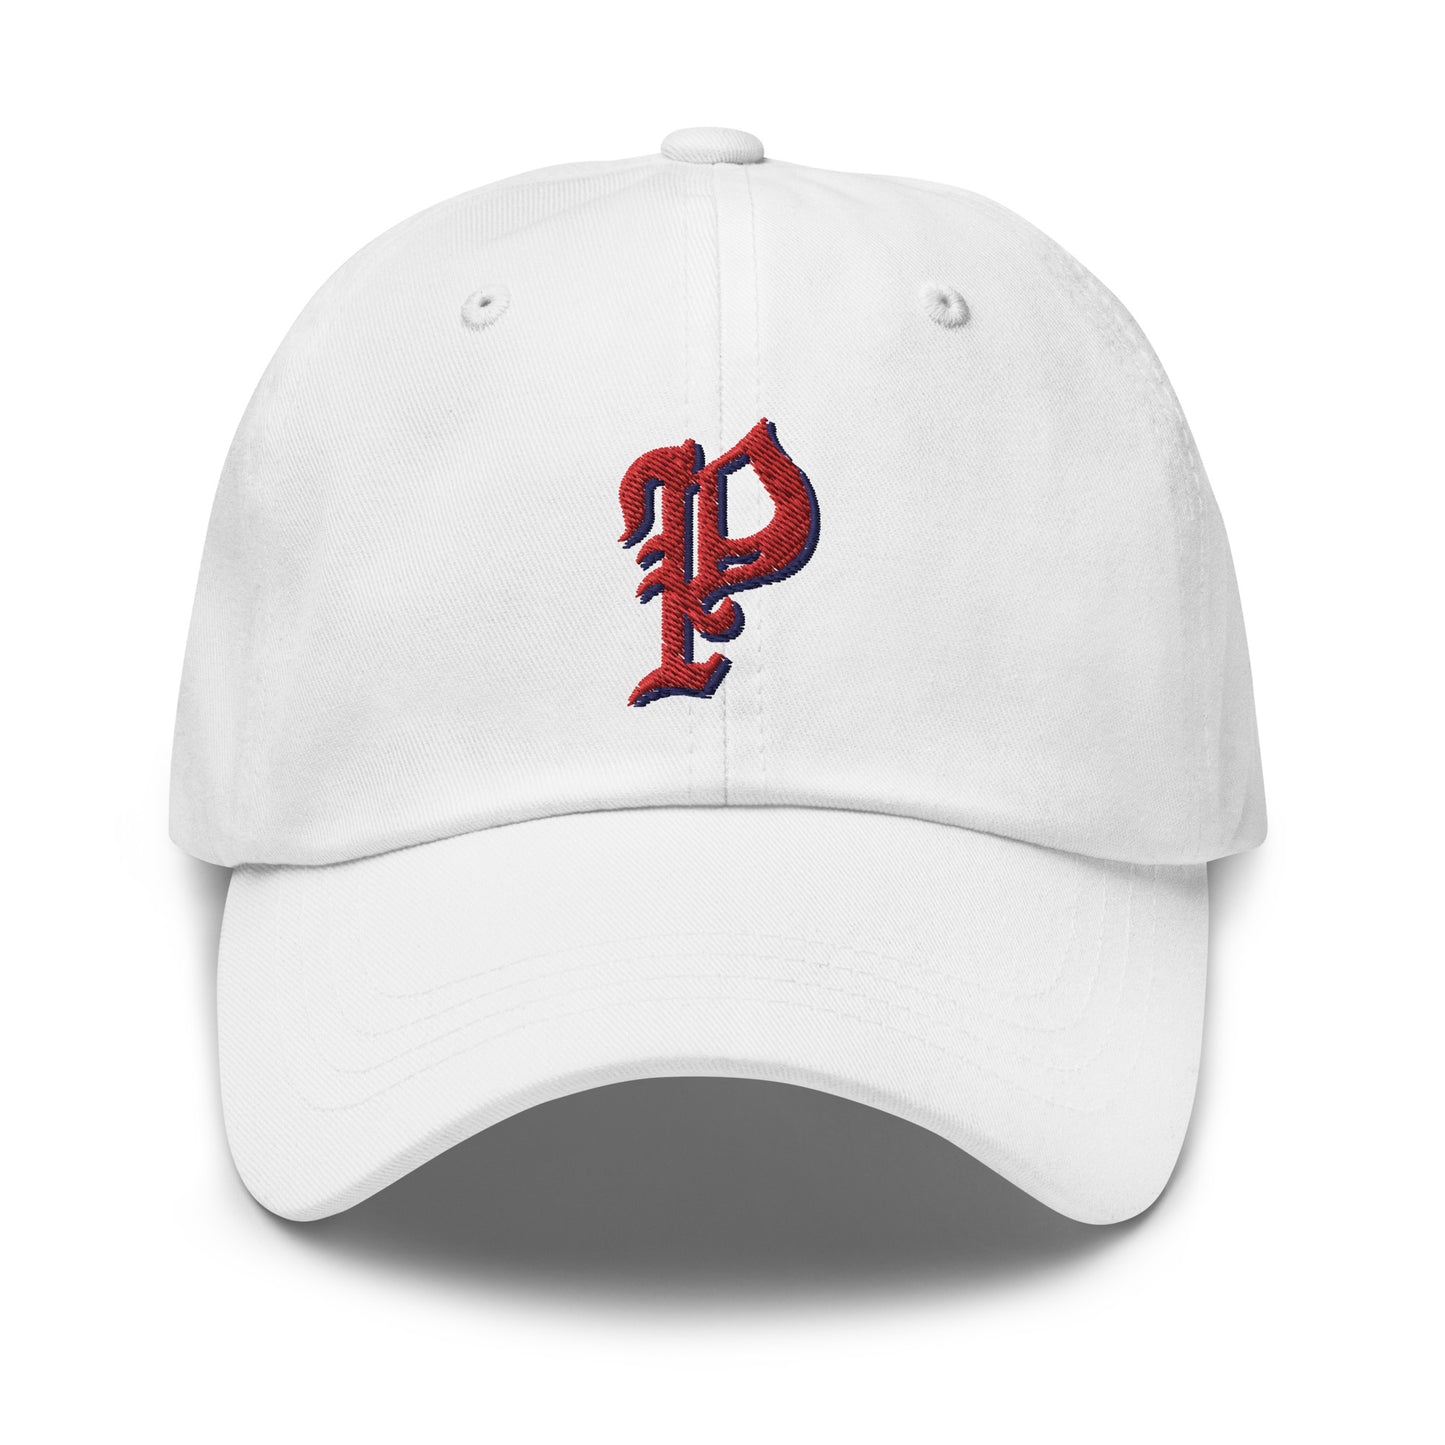 Embroidered City Edition "P" Hat